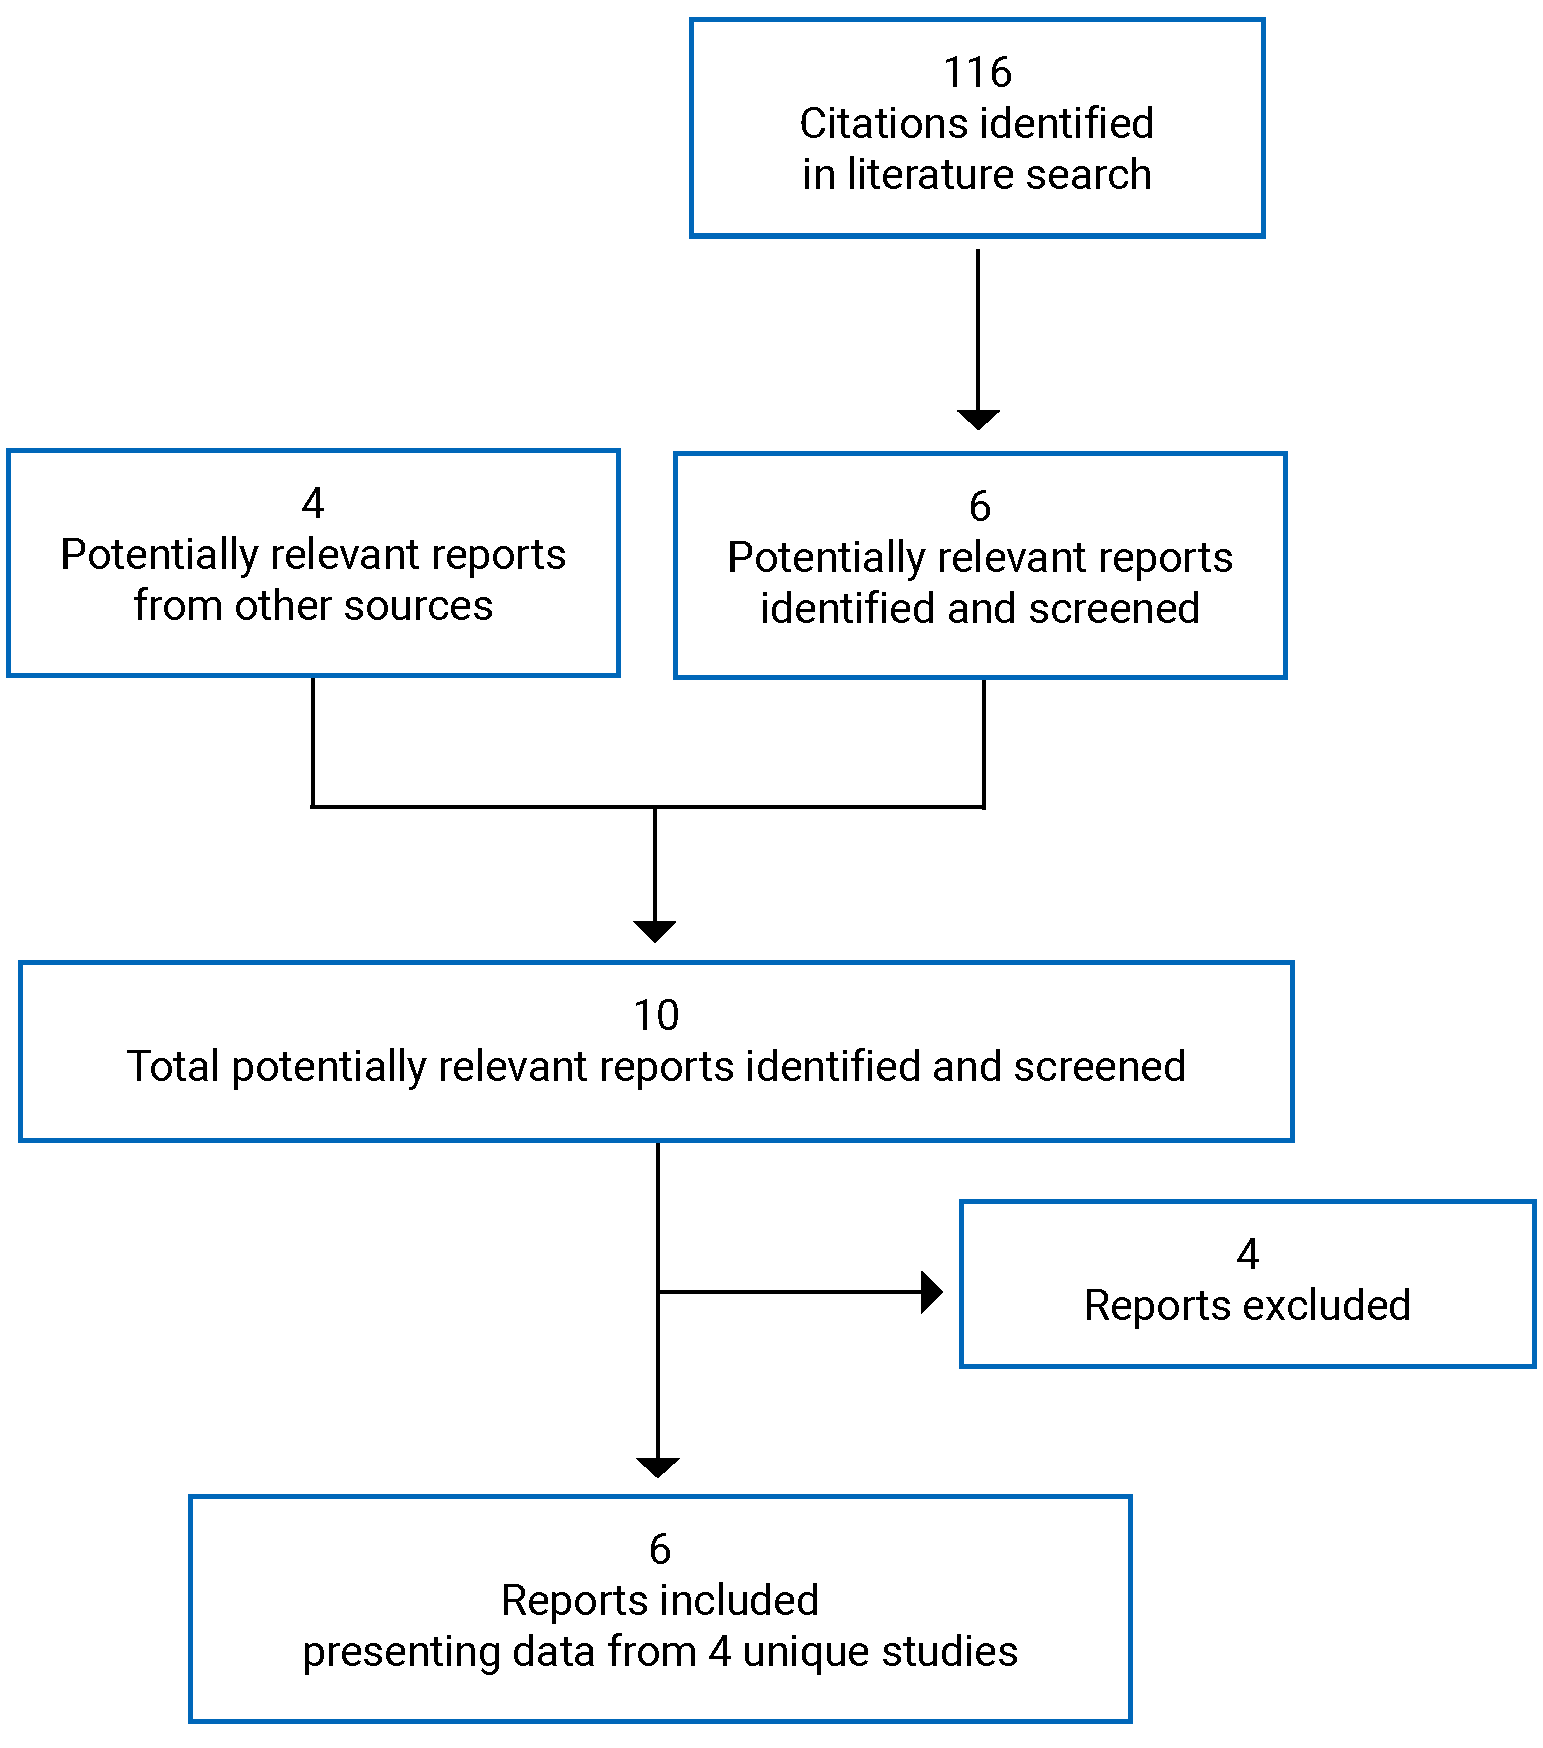 Of the 116 citations identified, 110 were excluded, while 4 electronic literature potentially relevant full-text reports were retrieved for scrutiny. Six reports are included in the review.